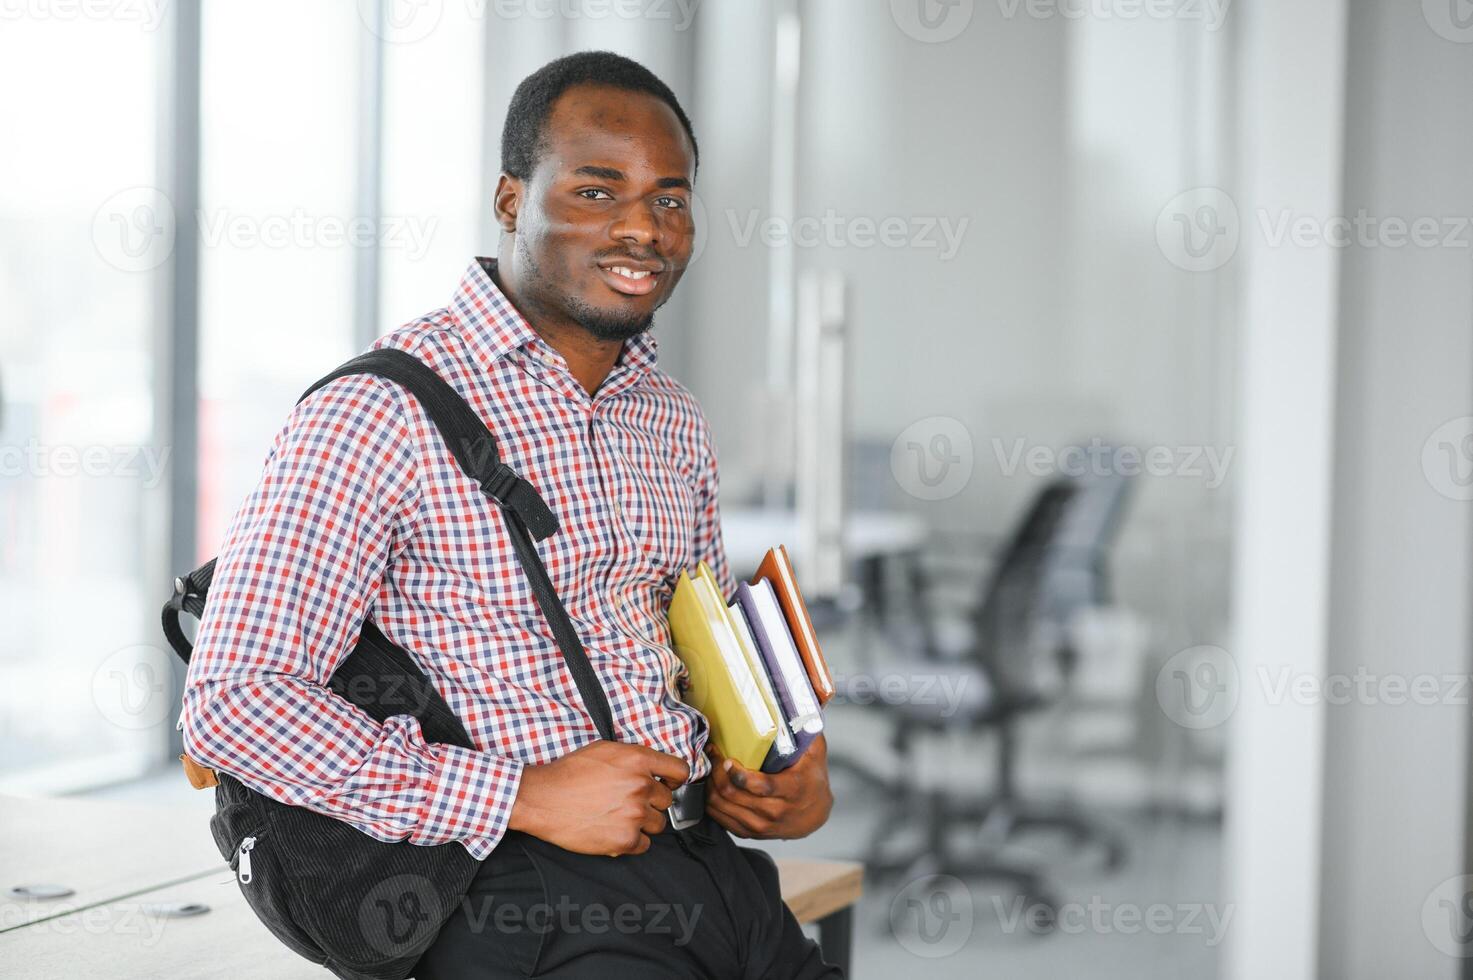 Portrait of african university student in class looking at camera photo